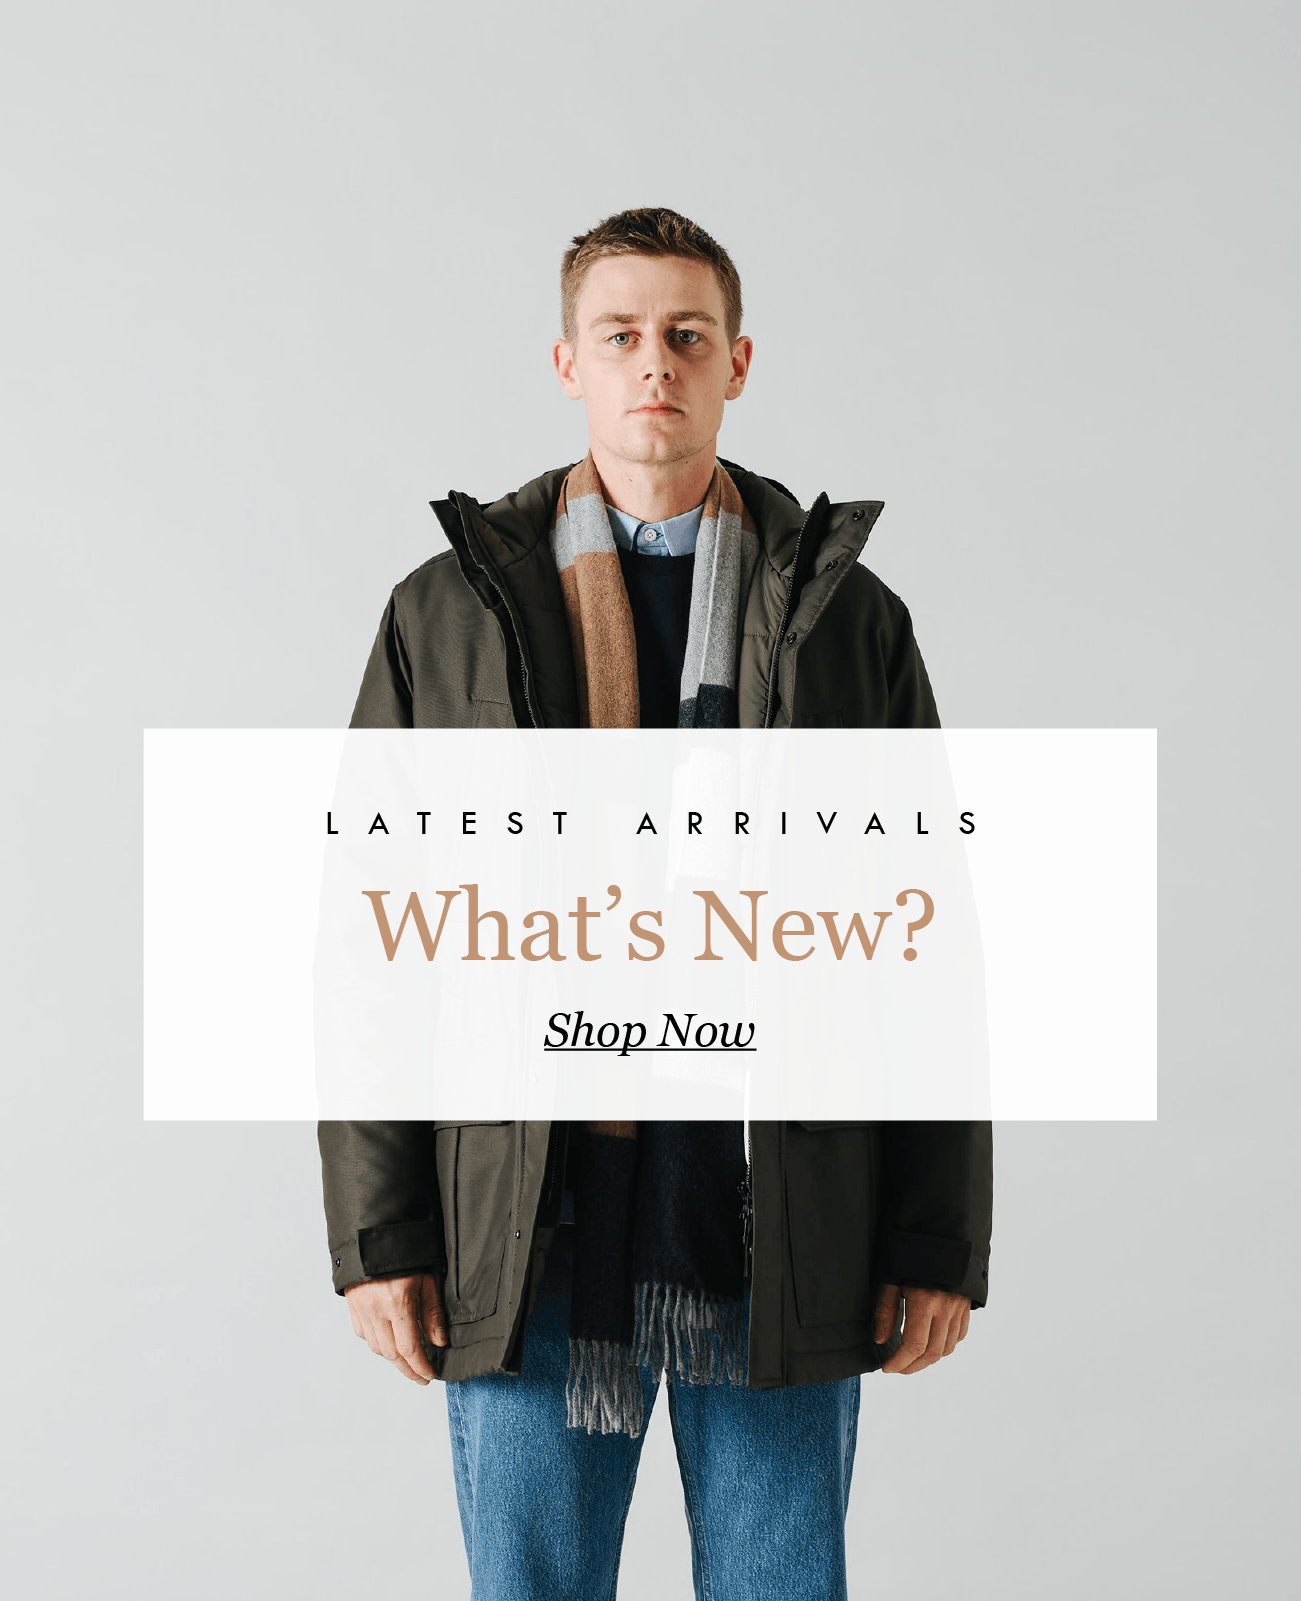 LATEST ARRIVALS
What''s New? 
Shop Now